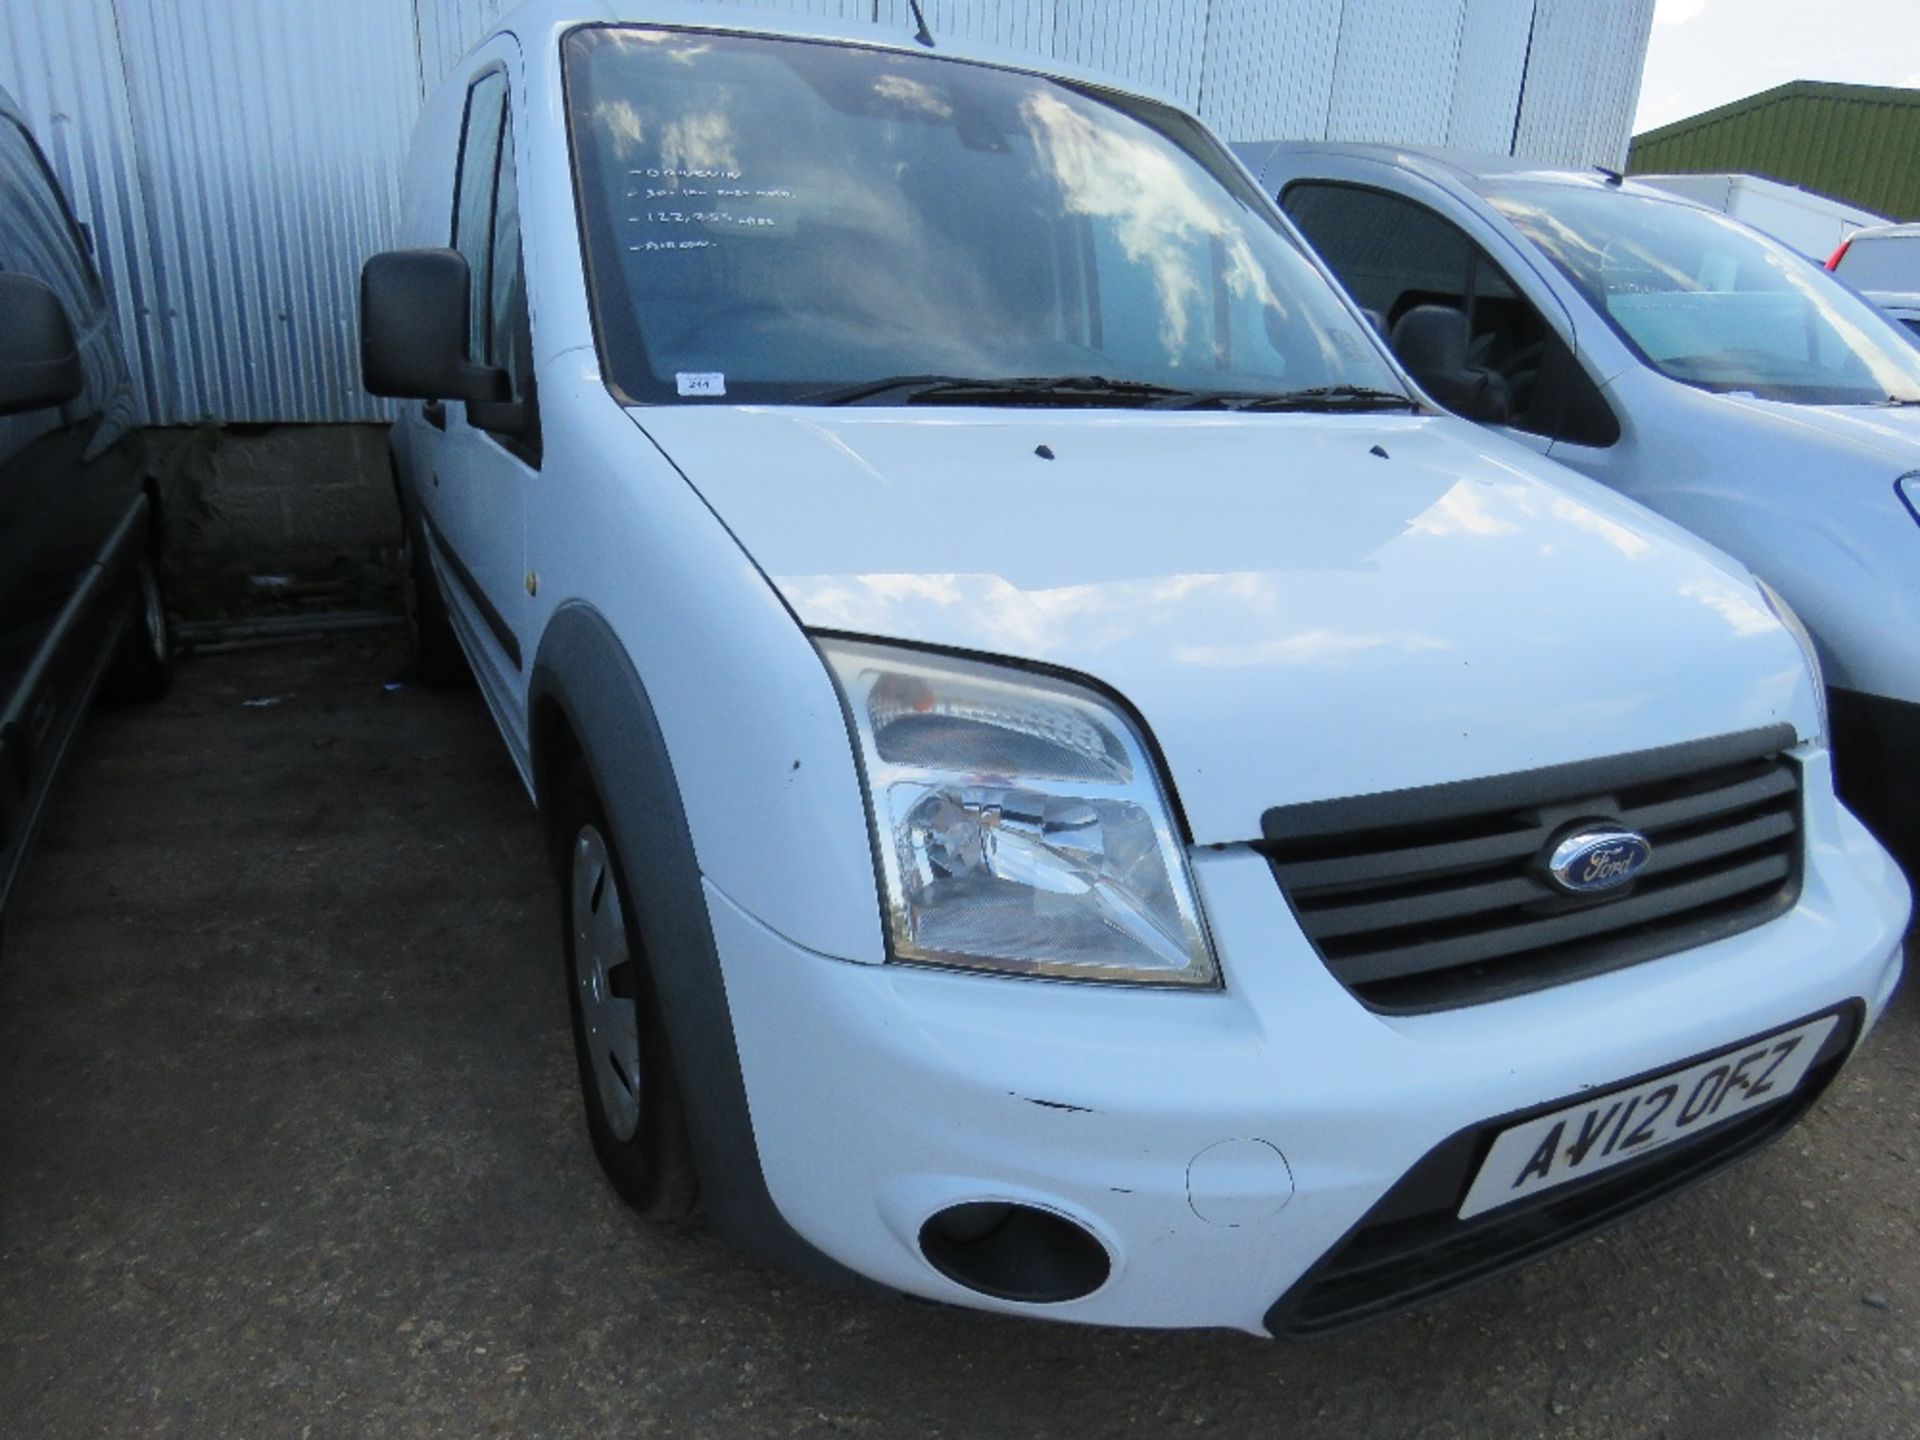 FORD TRANSIT CONNECT PANEL VAN 122,255 REC MILES, WITH AIR CON. REG:AV12 OFZ WITH V5. TESTED TILL 3